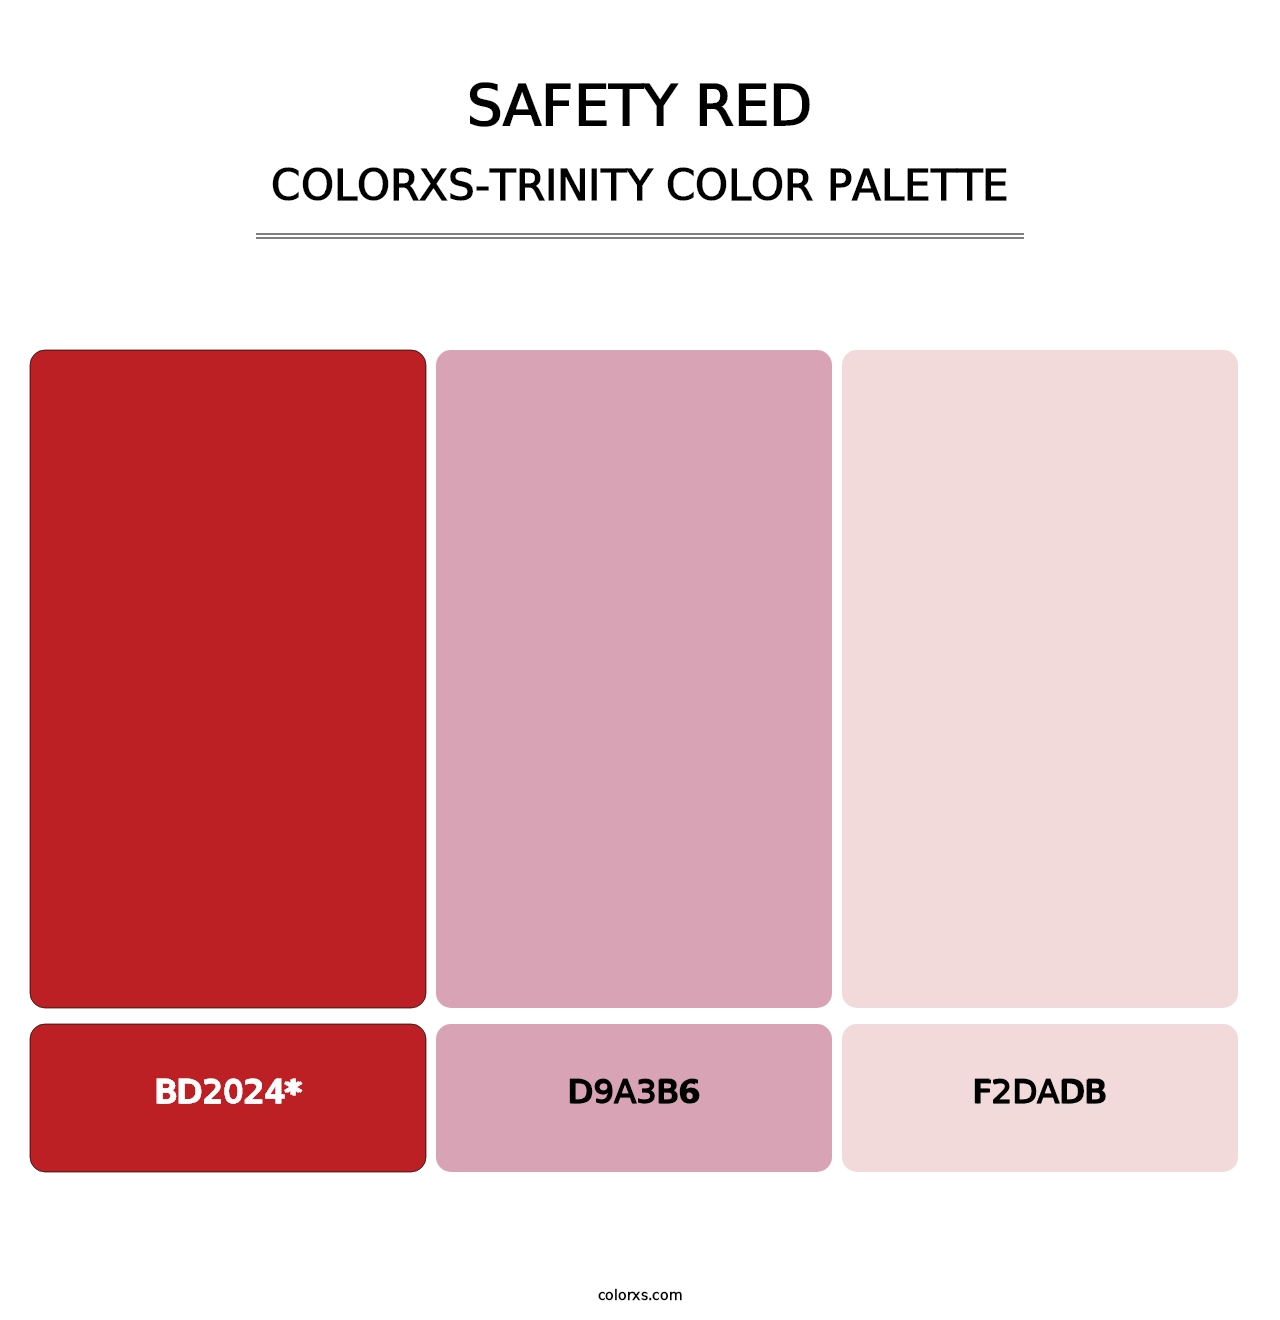 Safety Red - Colorxs Trinity Palette